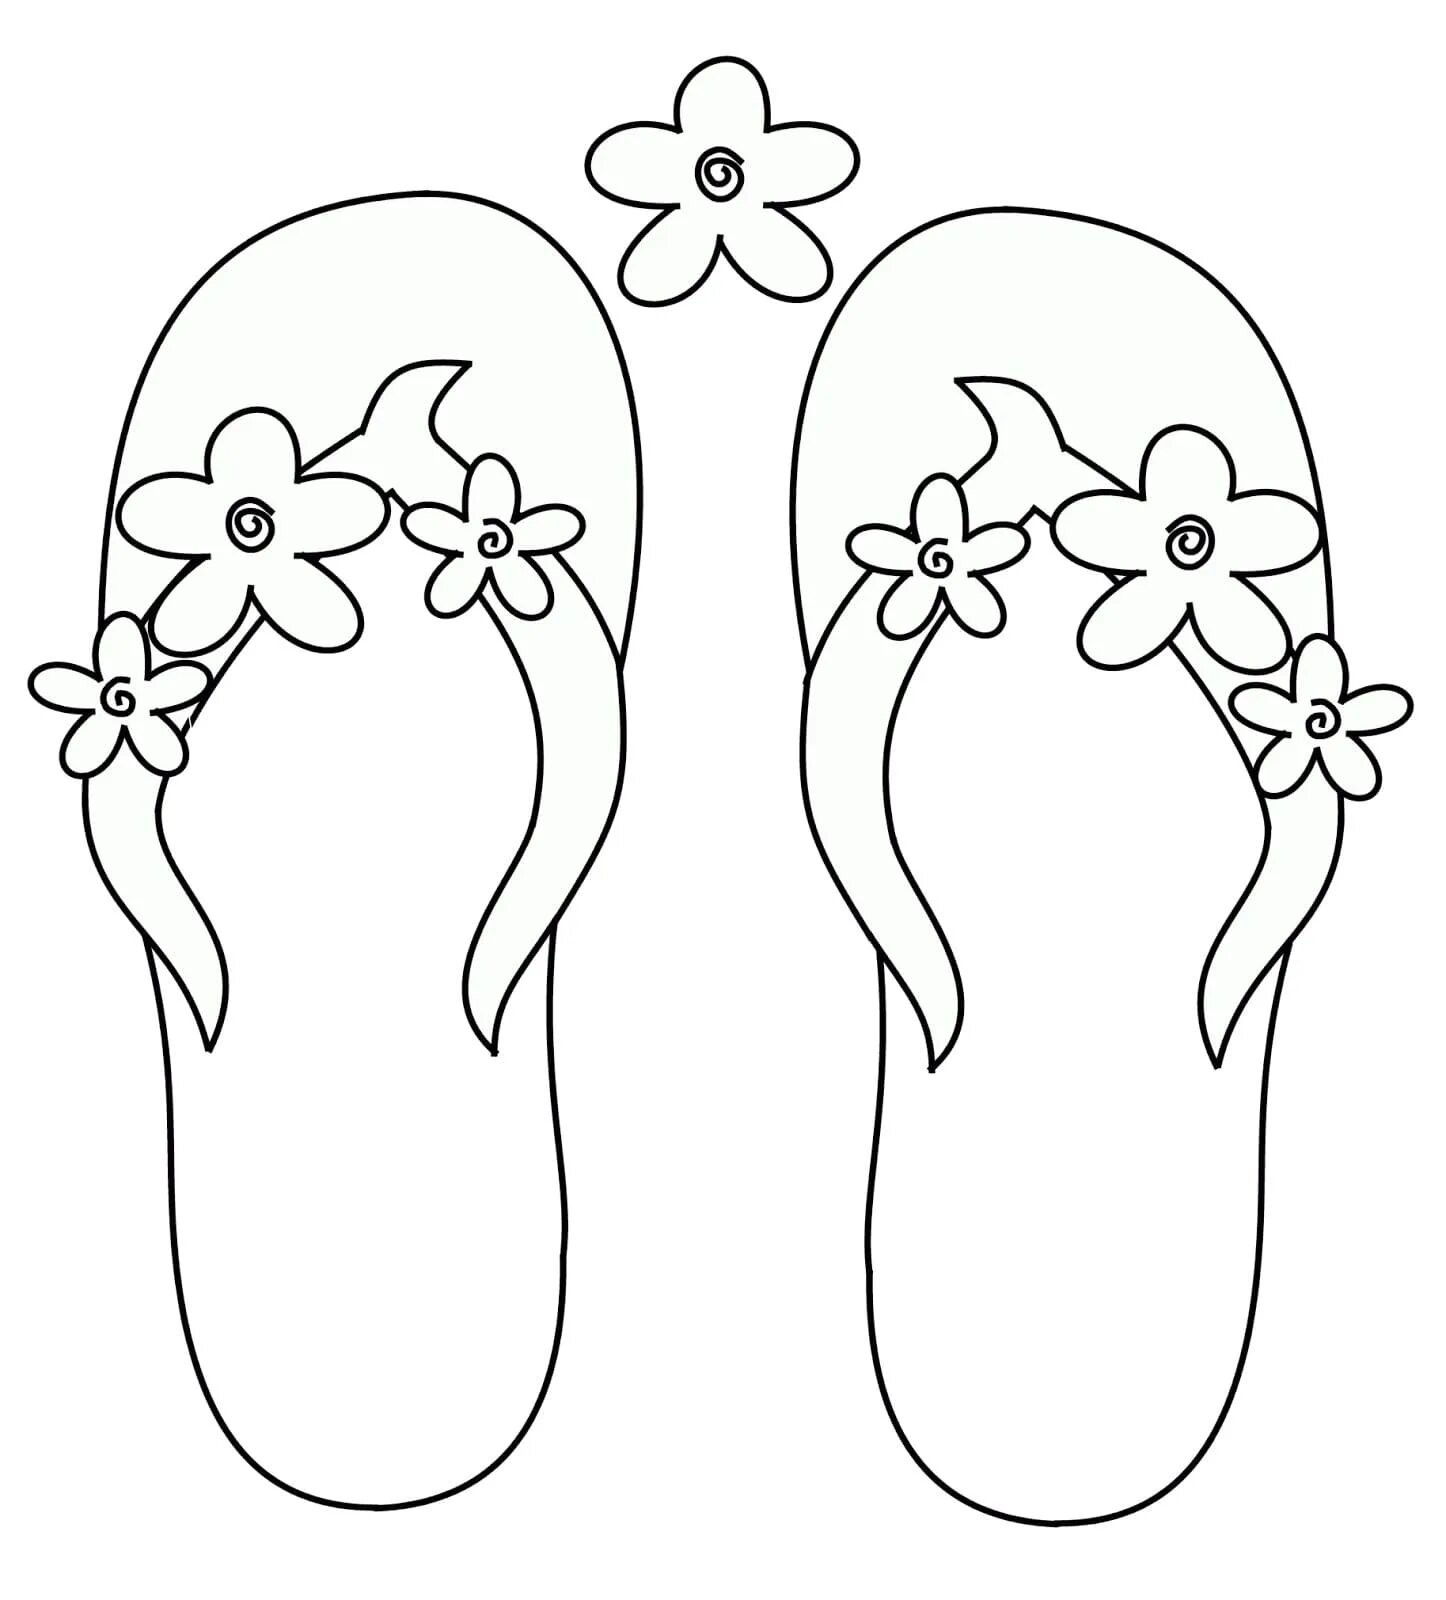 Coloring slippers for preschoolers